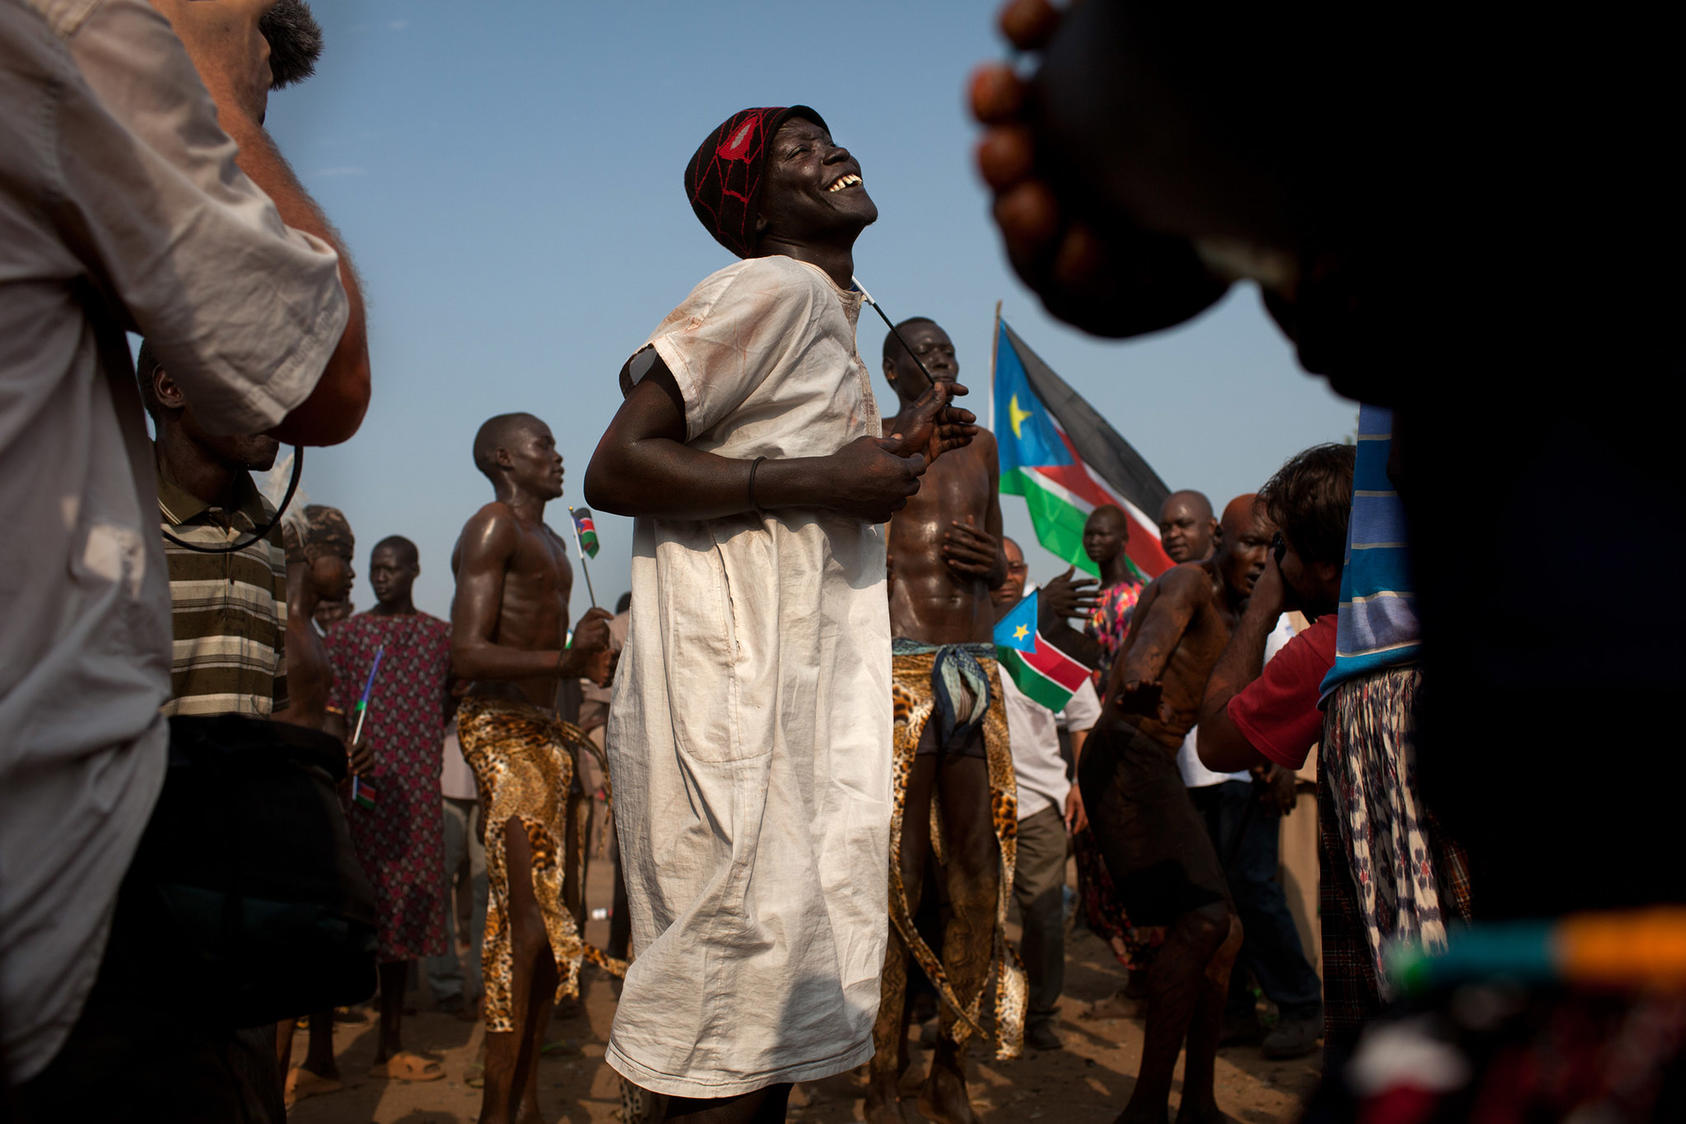 Revelers sing and dance as they celebrate their nation's independence in Juba, South Sudan, July 9, 2011. (Tyler Hicks/The New York Times)